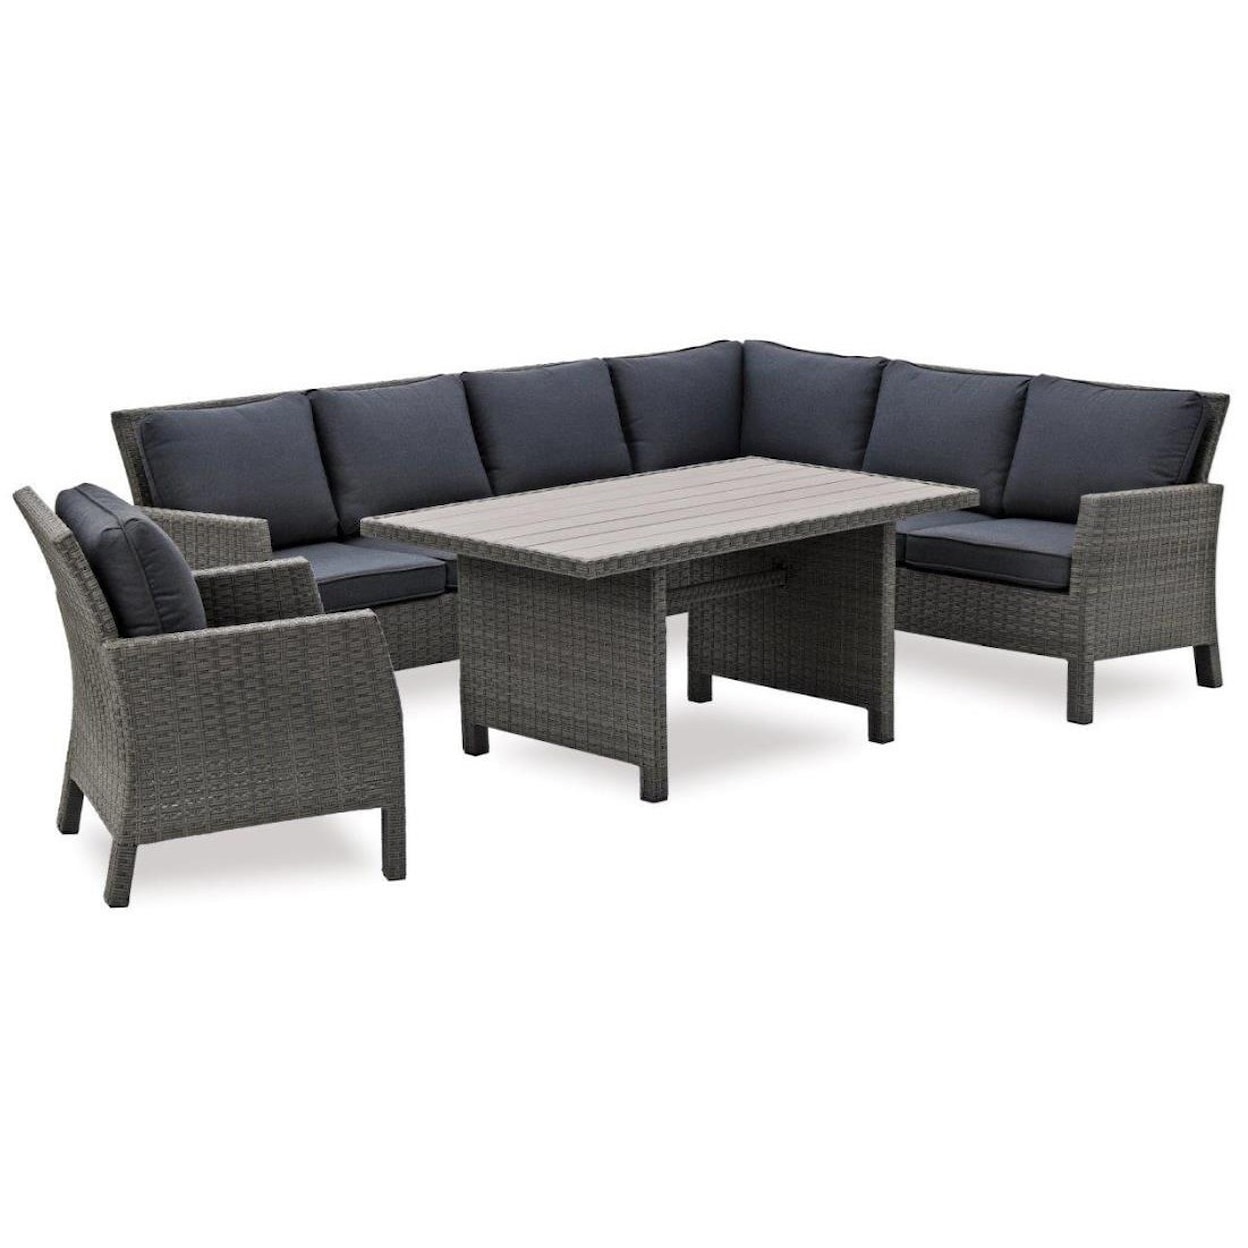 Primo International Arcadia Wicker and Aluminum Outdoor Sectional